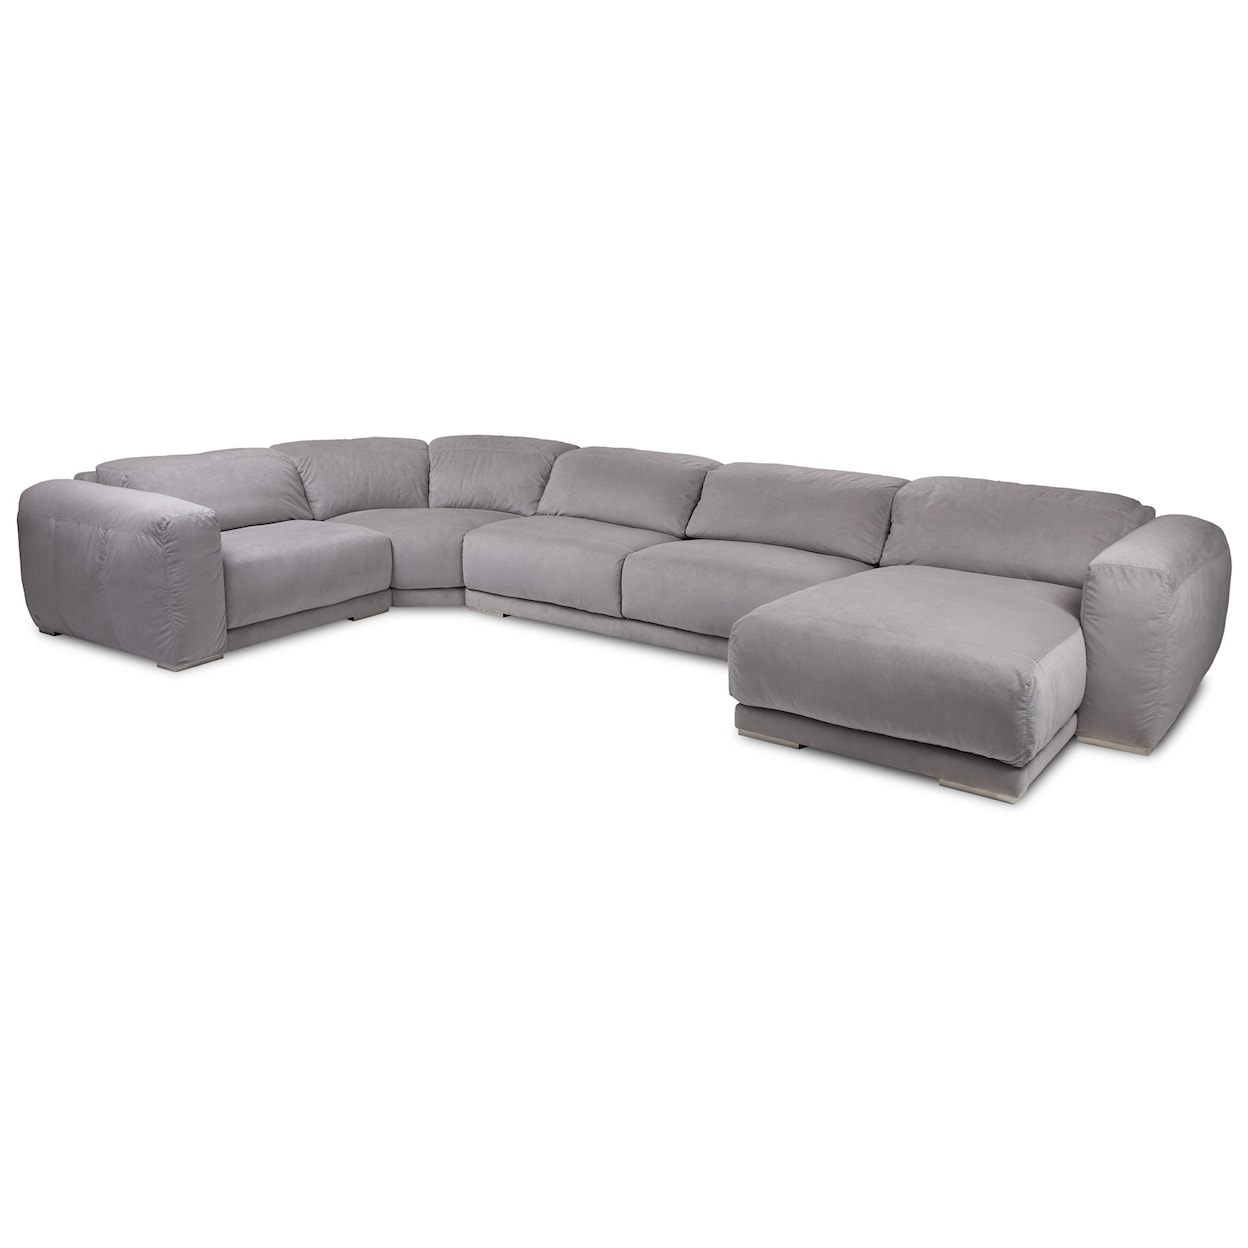 American Leather Malibu 4-Seat Sectional w/ Left Arm Sitting Chaise